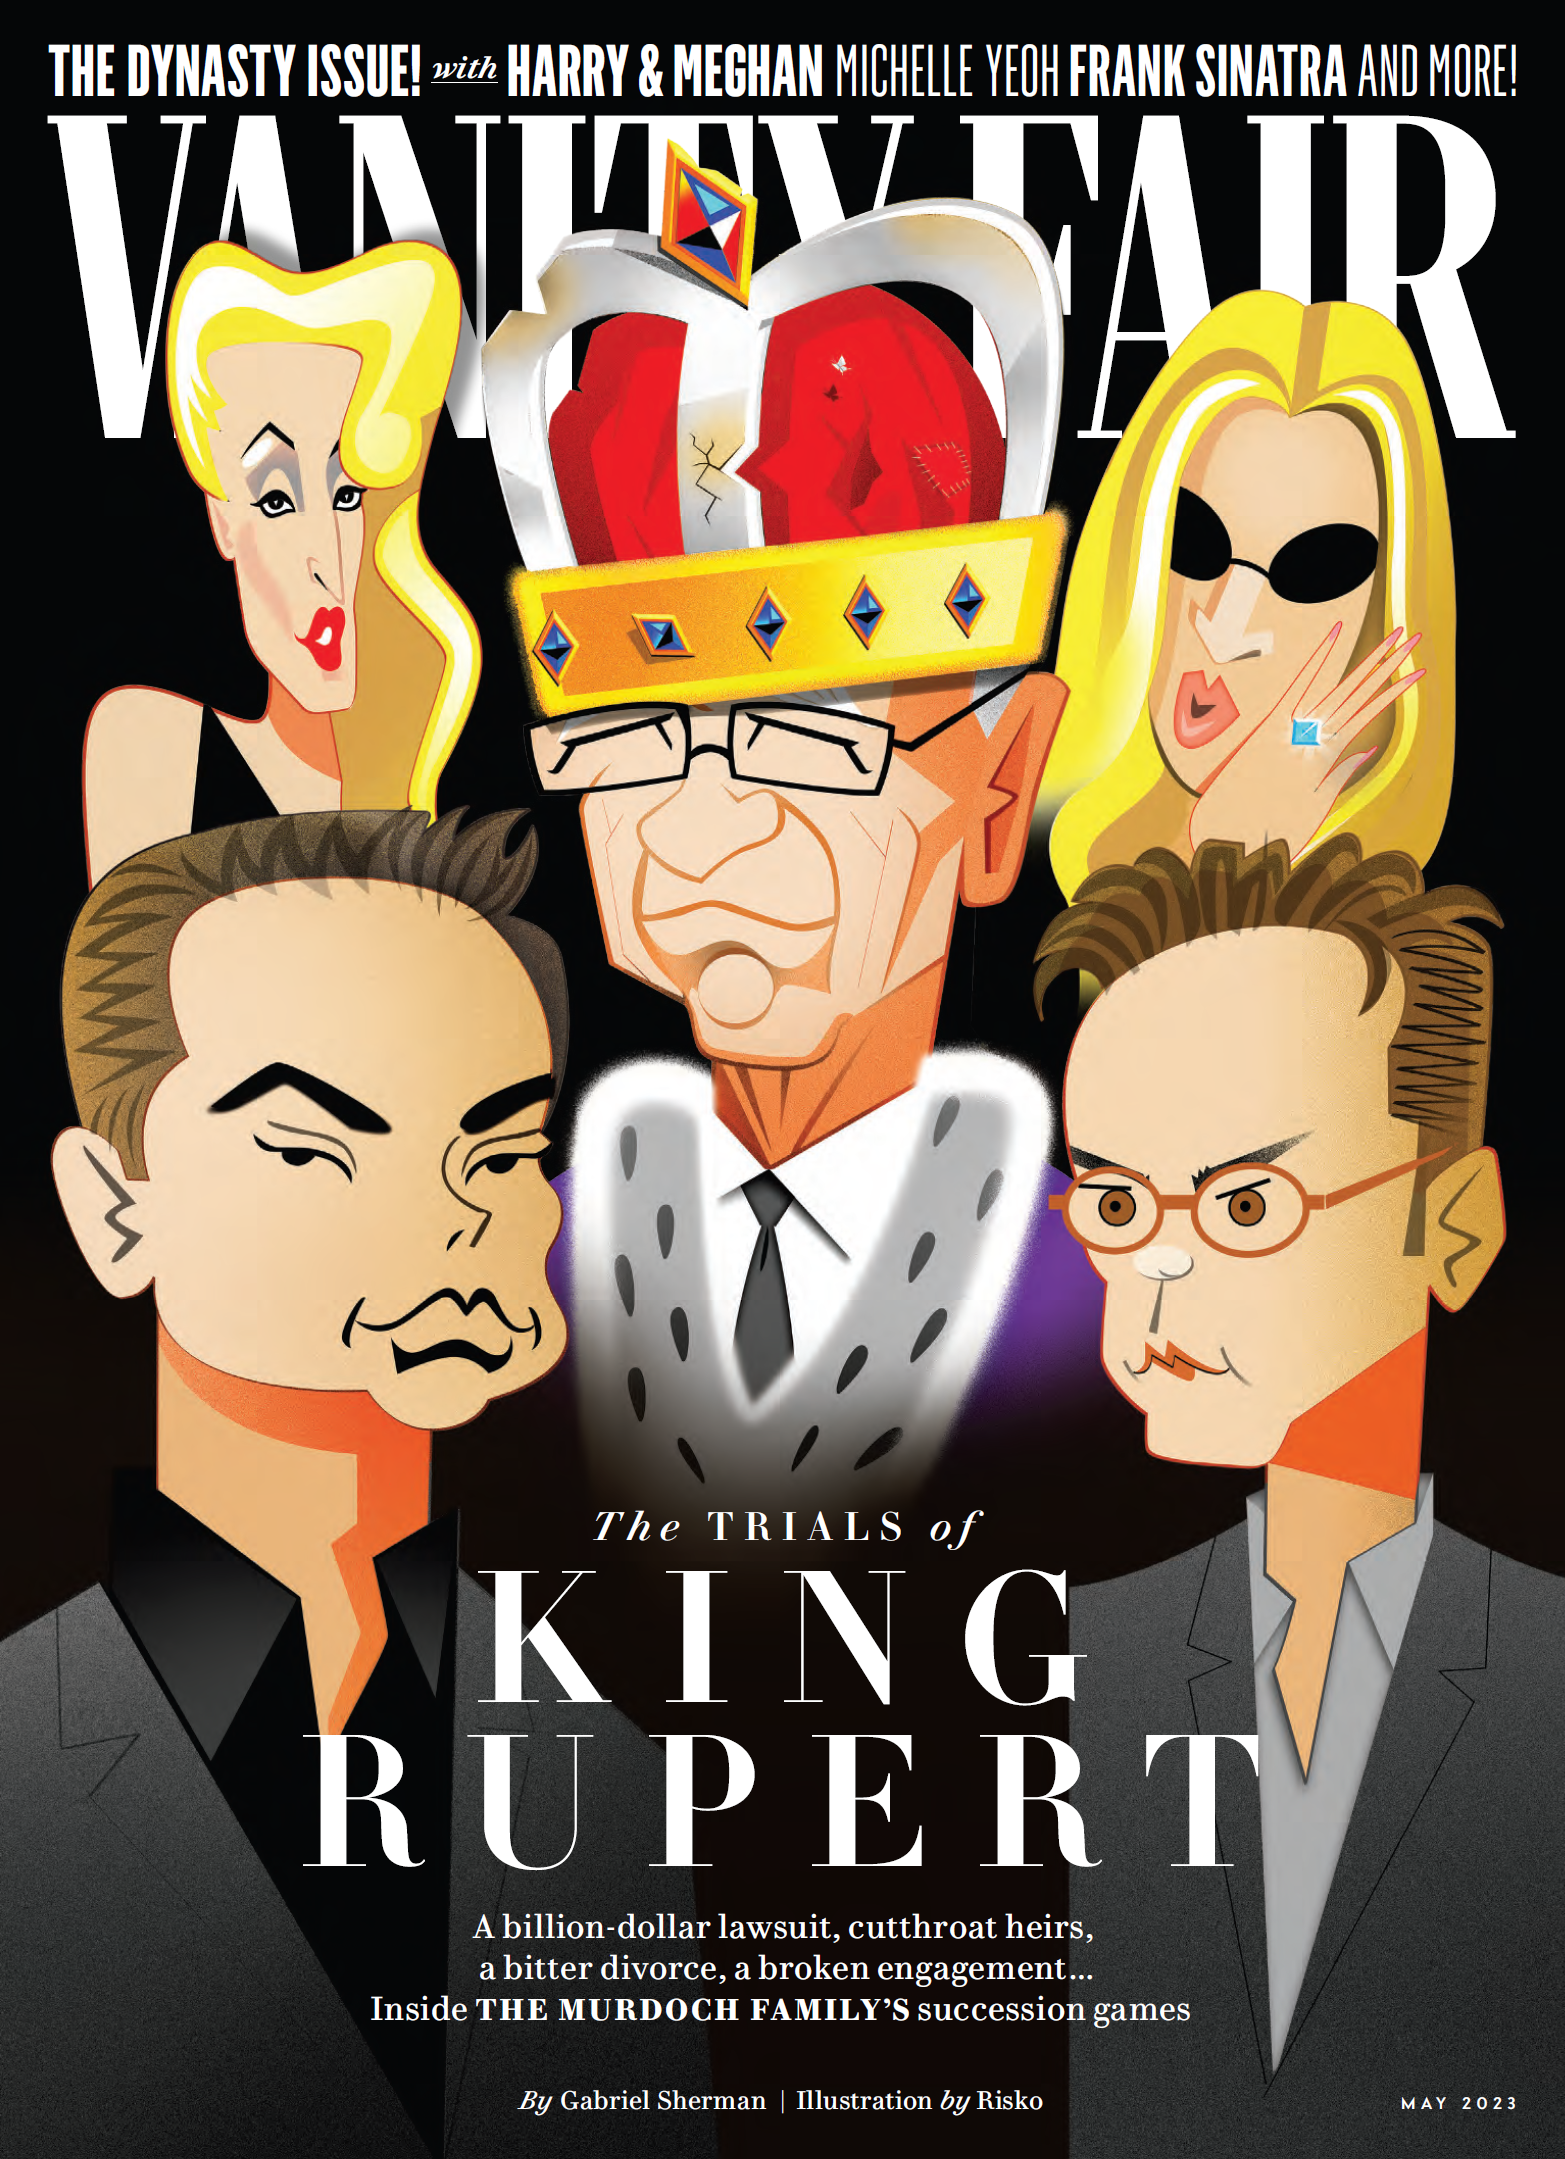 vanity Fair magazine feature highlighting caricatures of king rupert and highlighting jewelry from the wandering jewel